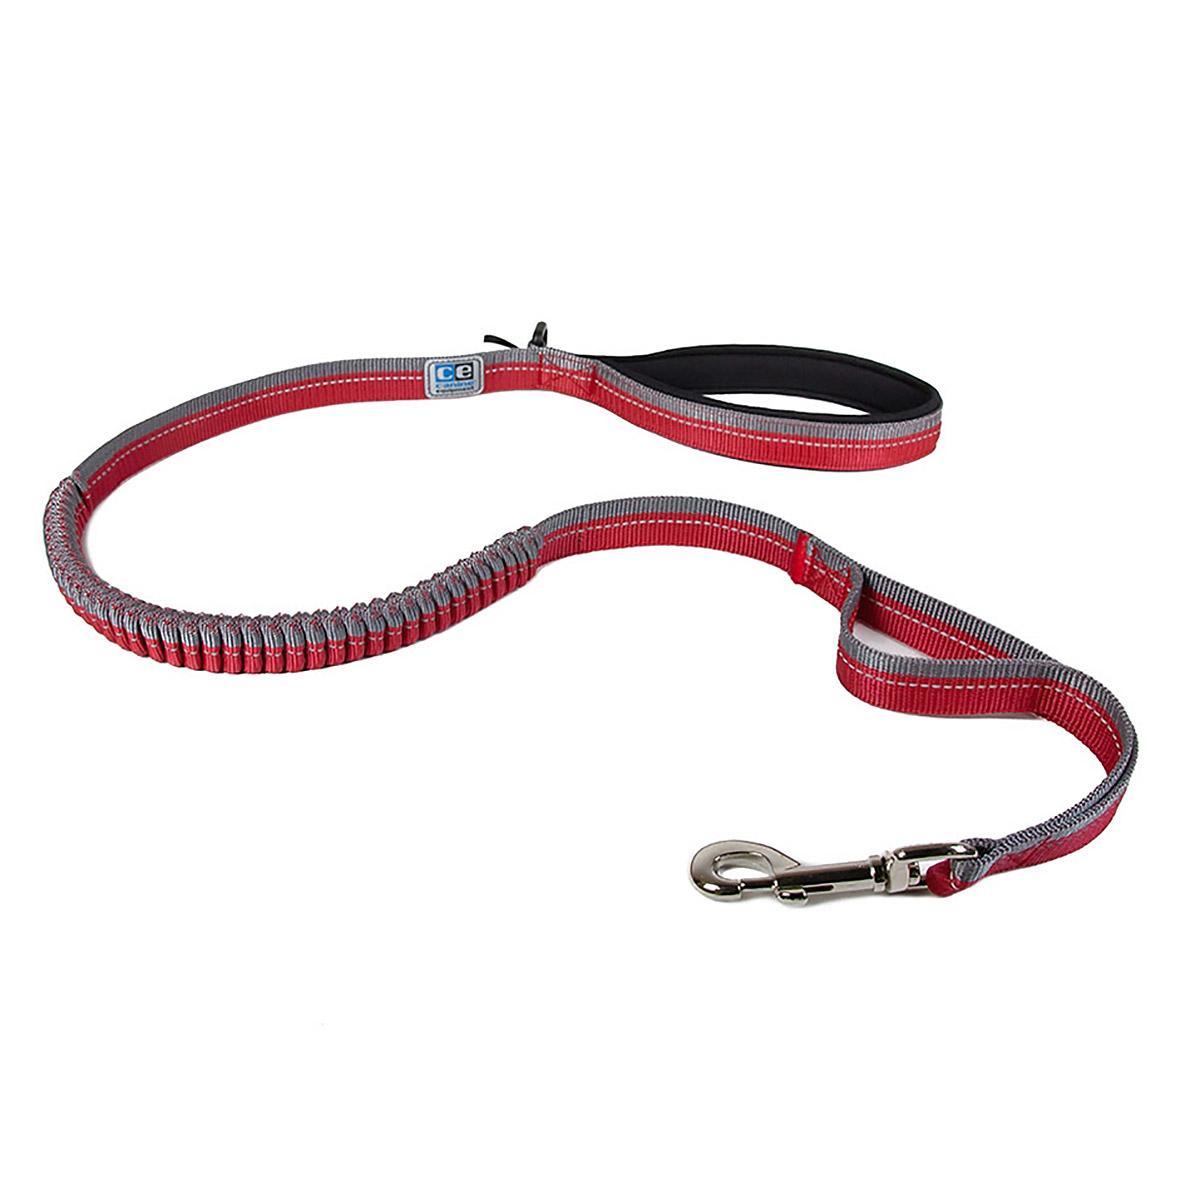 Bungee Traffic Dog Leash by Canine Equipment - Red/Grey